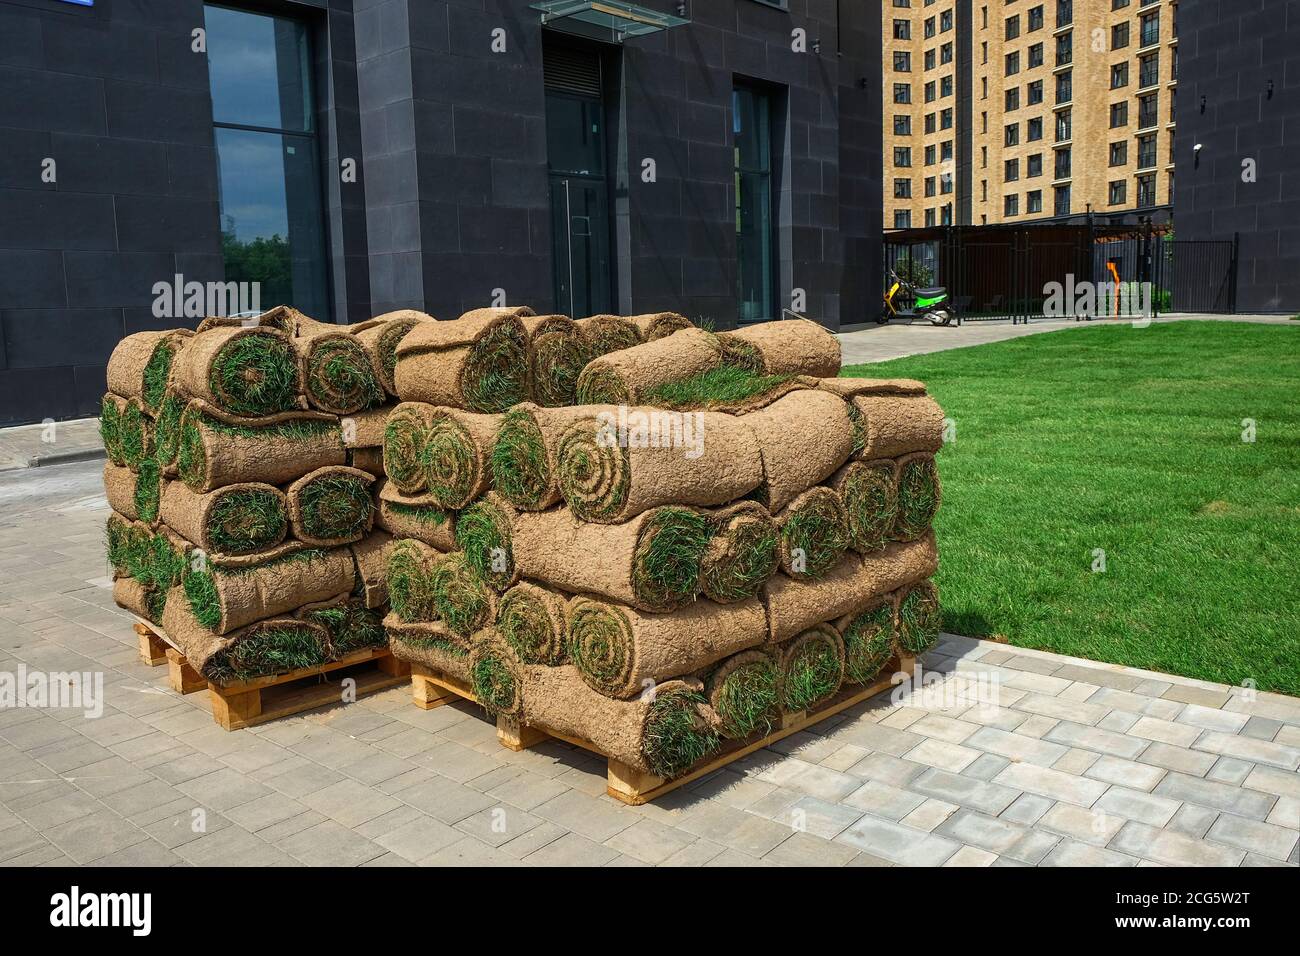 Pallets with sod turf grass. The stacked fresh sod rolls for new grass lawn in residential area.Urban greenery. Stock Photo